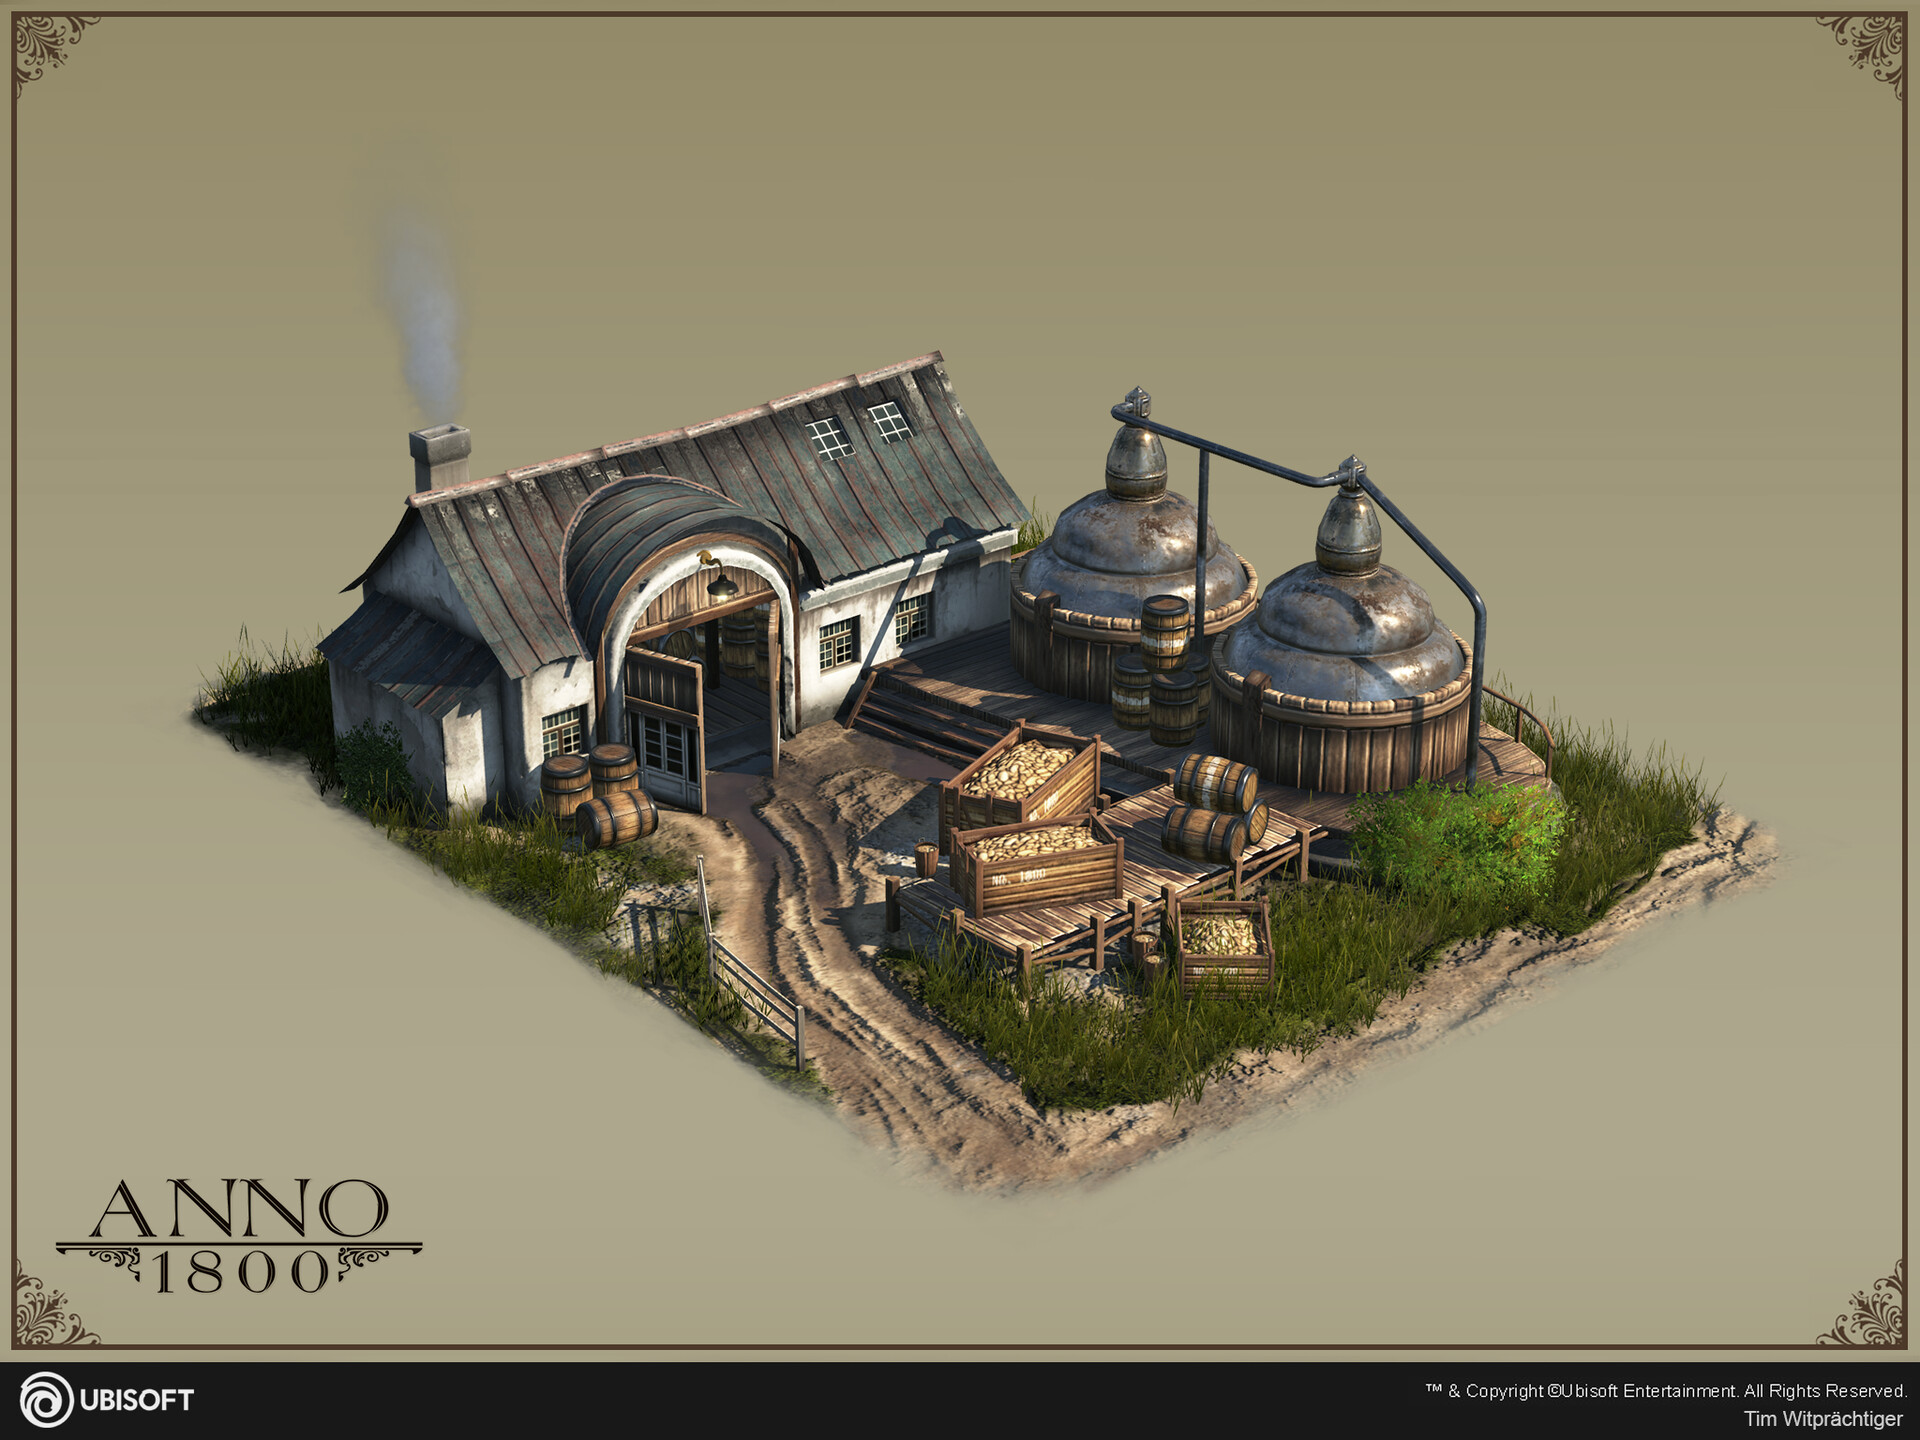 Anno 1800 Agricultureal Building